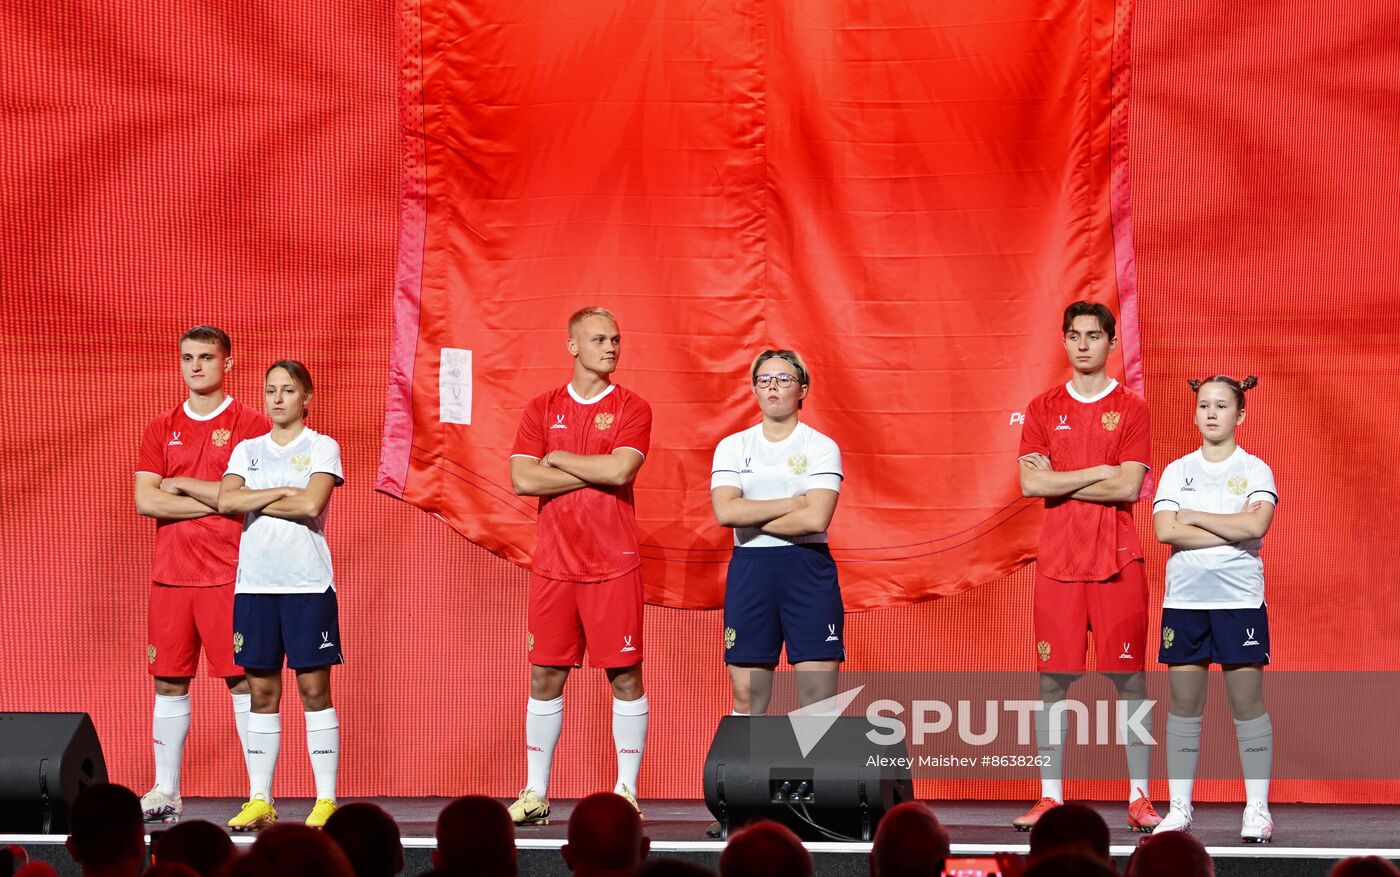 RUSSIA EXPO. Presentation of the Russian national football team's new uniform